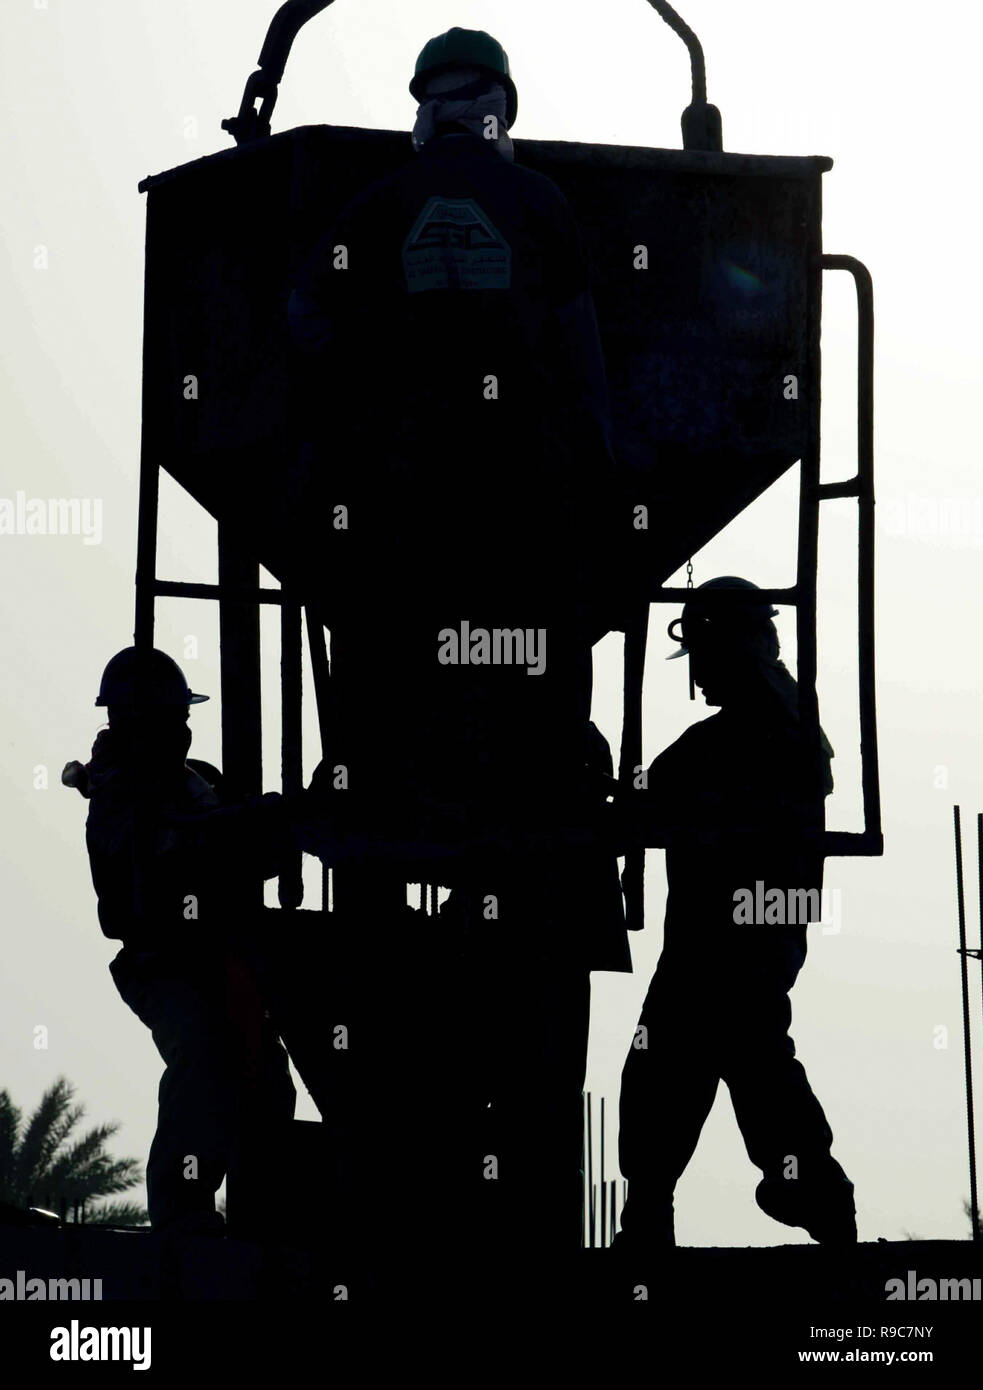 Dubai, United Arab Emirates, UAE - 14JUN2004: Workers silhouetted during the late afternoon while laying a building foundation in the Dubai Marina area which was a hub of hundreds of major construction projects, during the boom times. Stock Photo